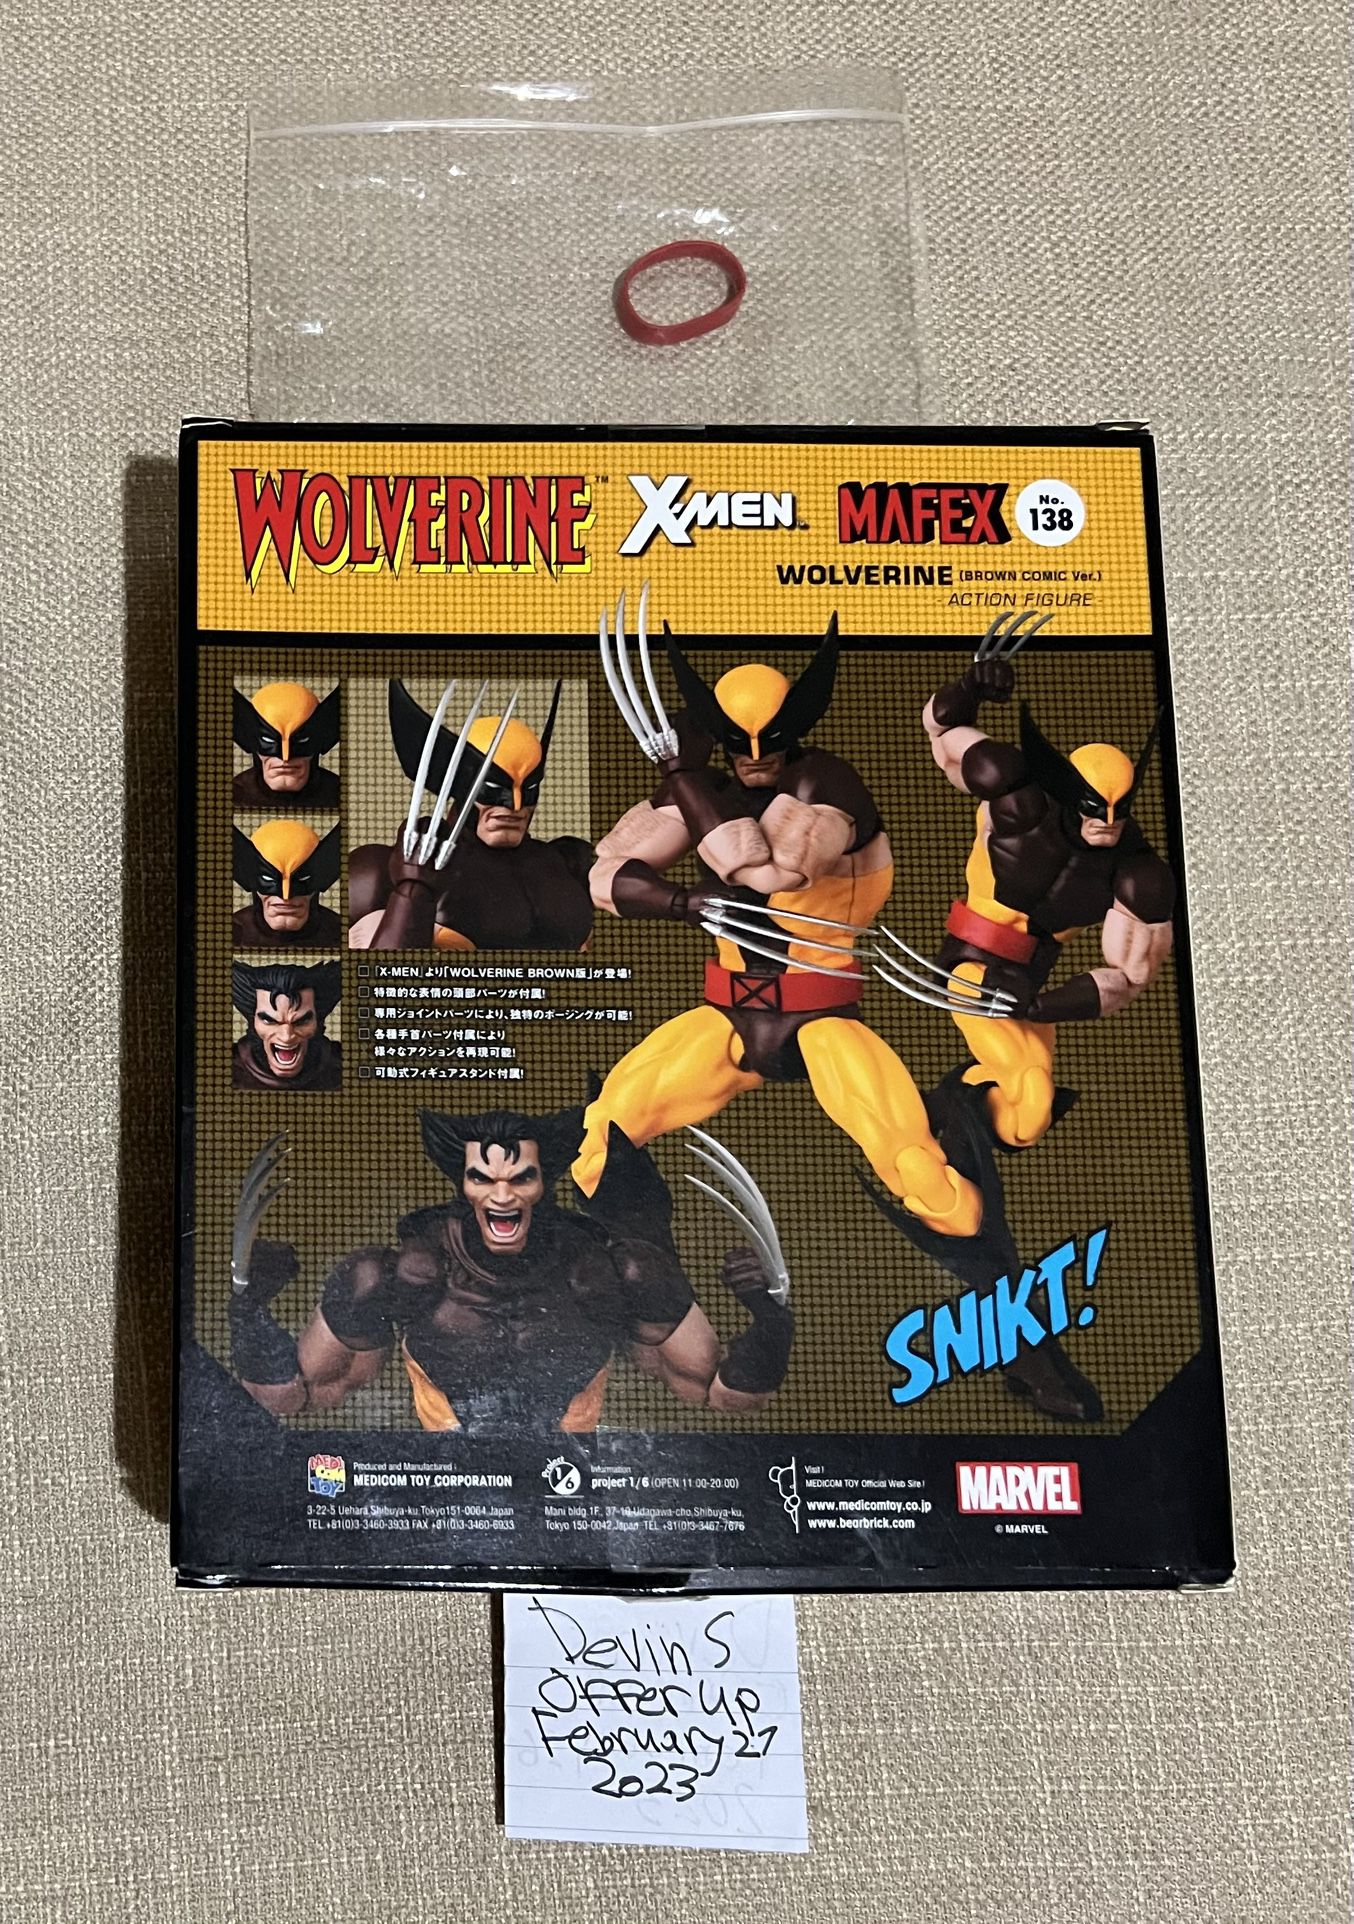 MAFEX マフェックス WOLVERINE BROWN comic ver. - アメコミ